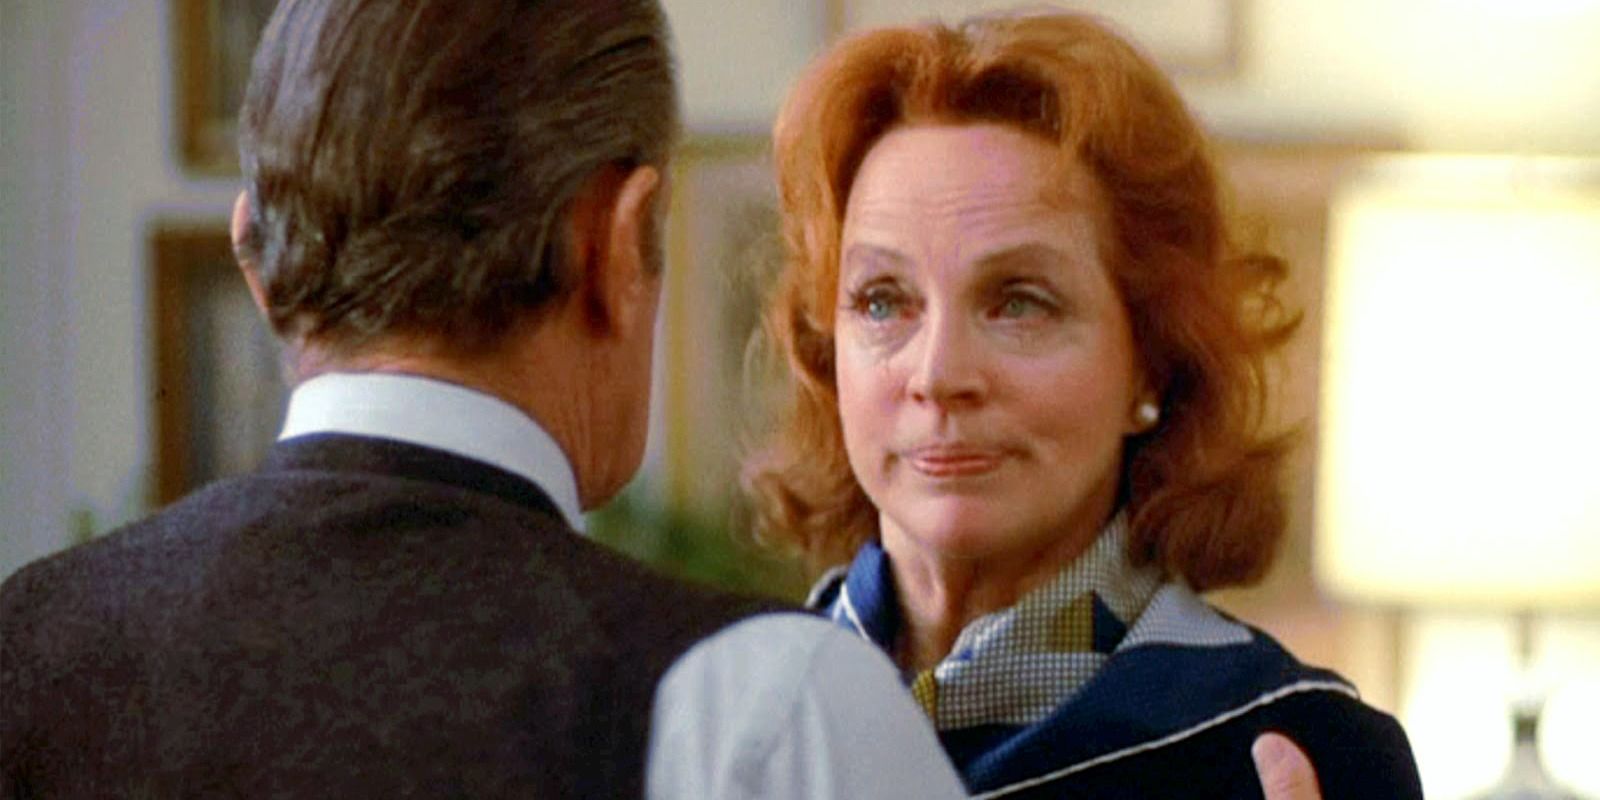 Beatrice Straight as Louise Schumacher having an intense moment with her husband Max Schumacher (William Holden) in Network 